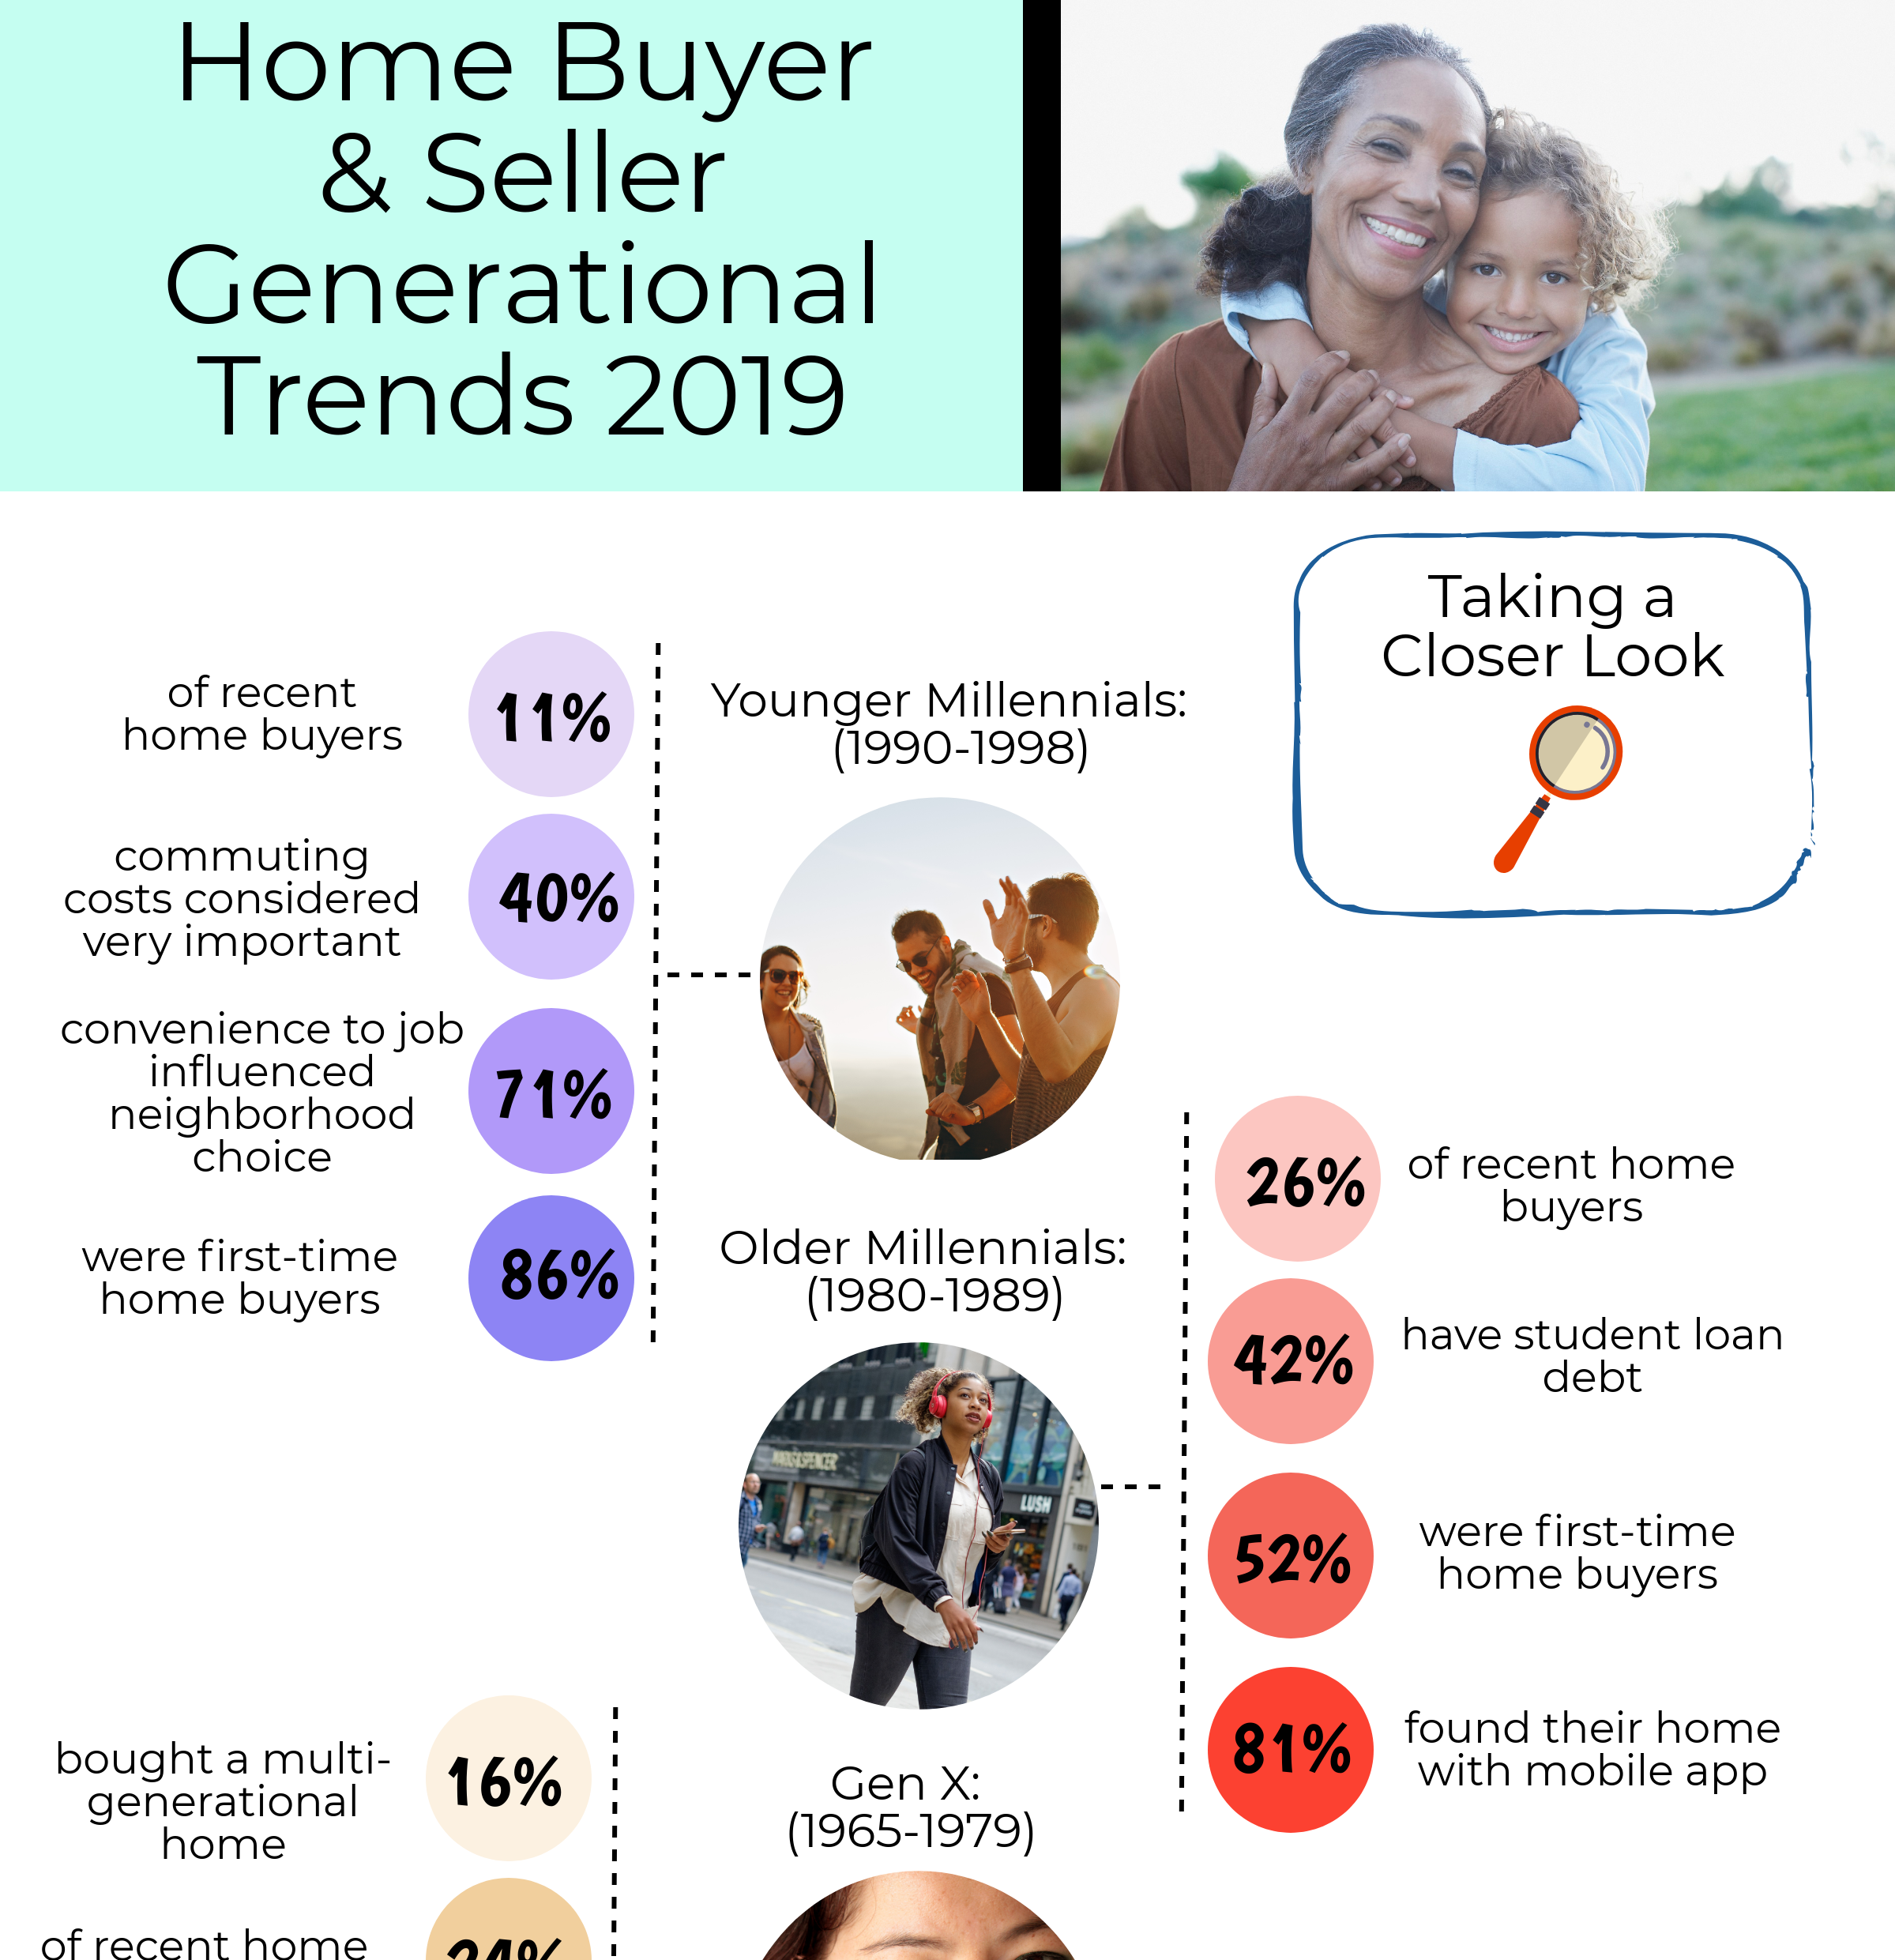 2019 Home Buyer and Seller Generational Trends